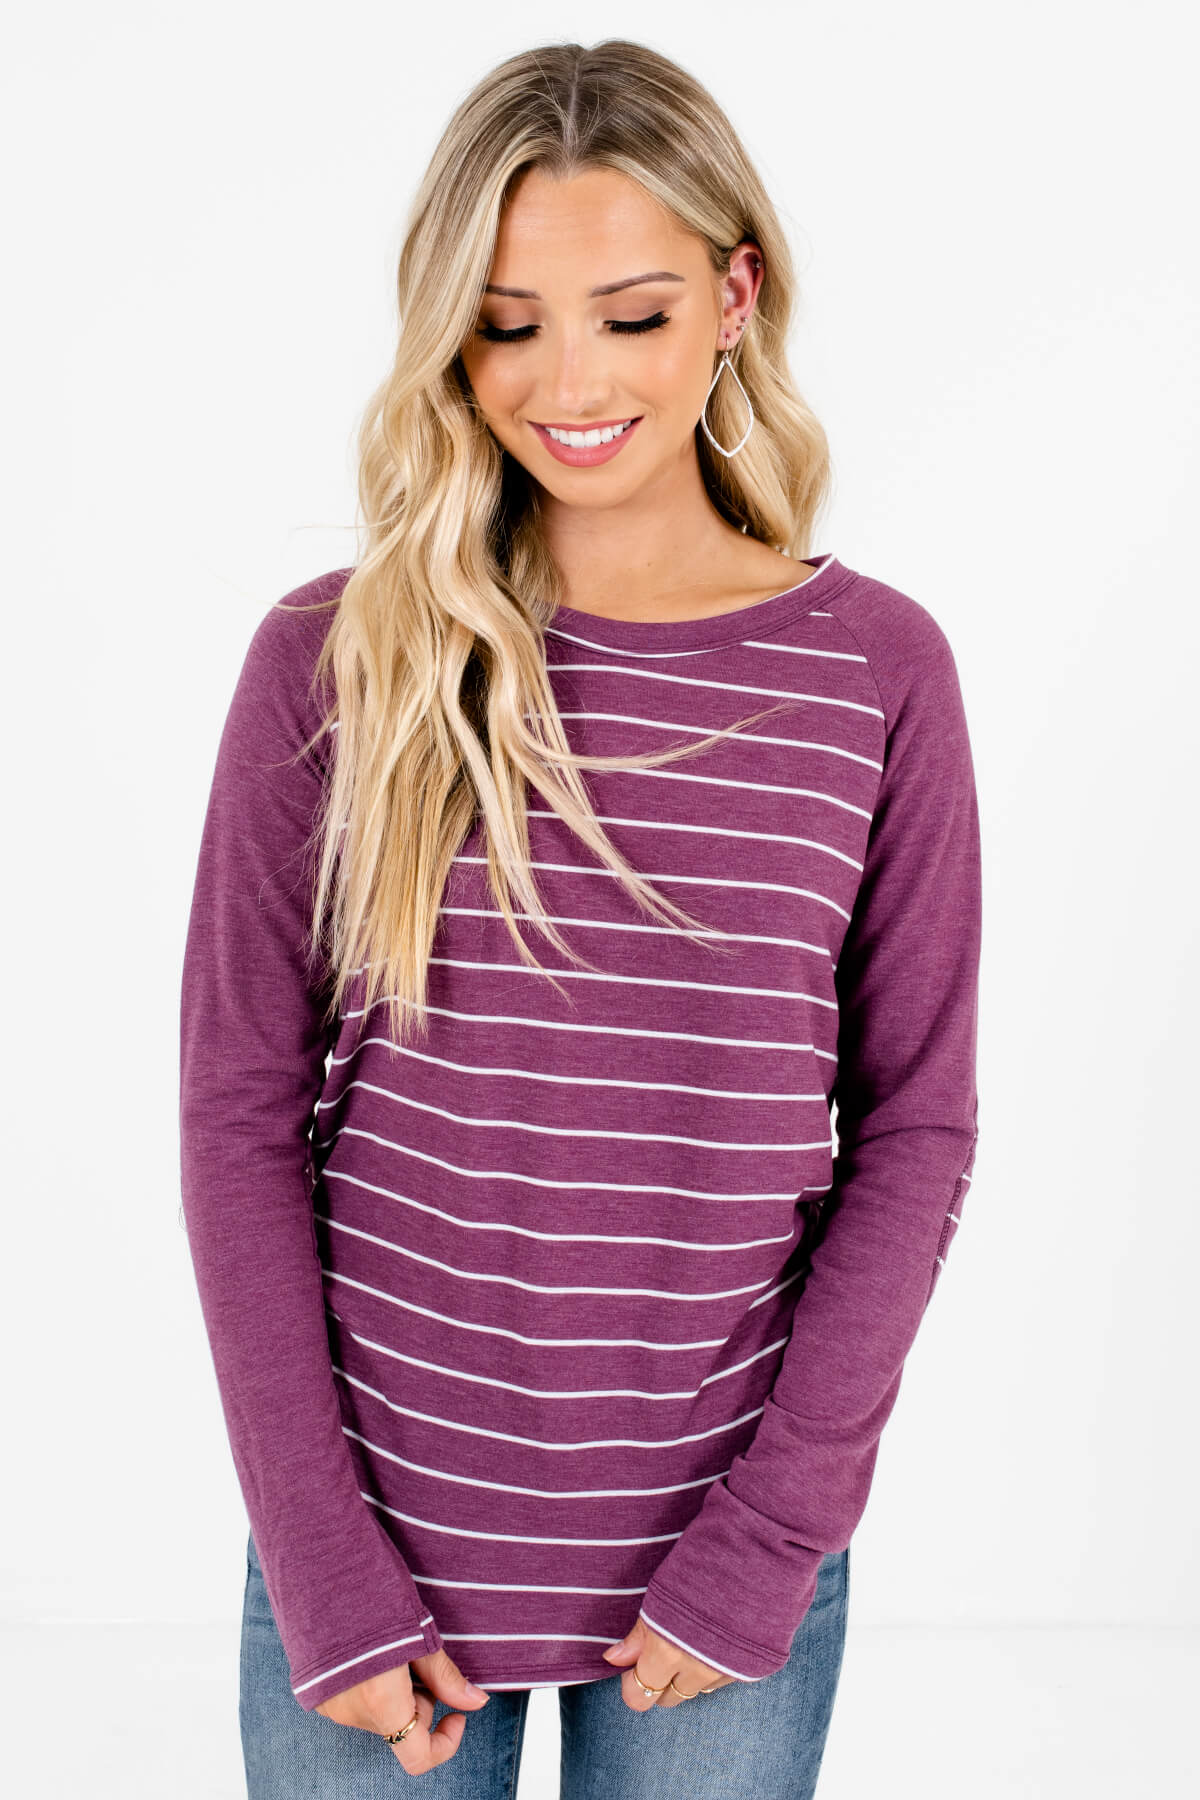 Purple and White Striped Boutique Tops for Women